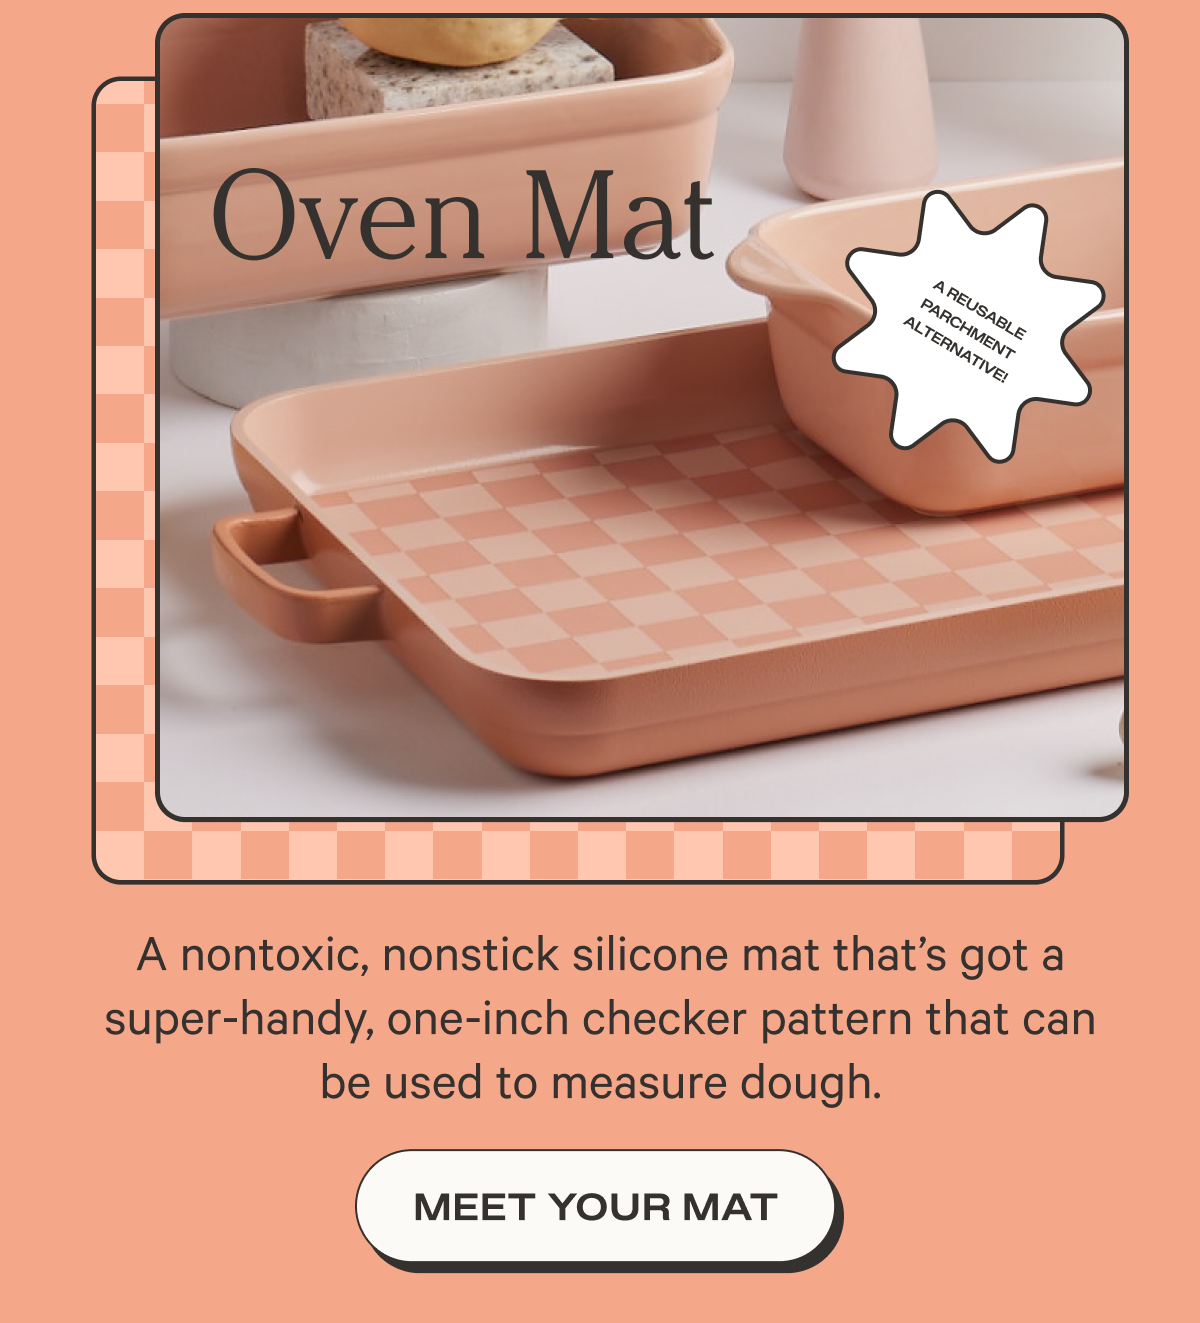 Oven Mat - A nontoxic, nonstick silicone mat that’s got a super-handy, one-inch checker pattern that can be used to measure dough. - Meet your mat